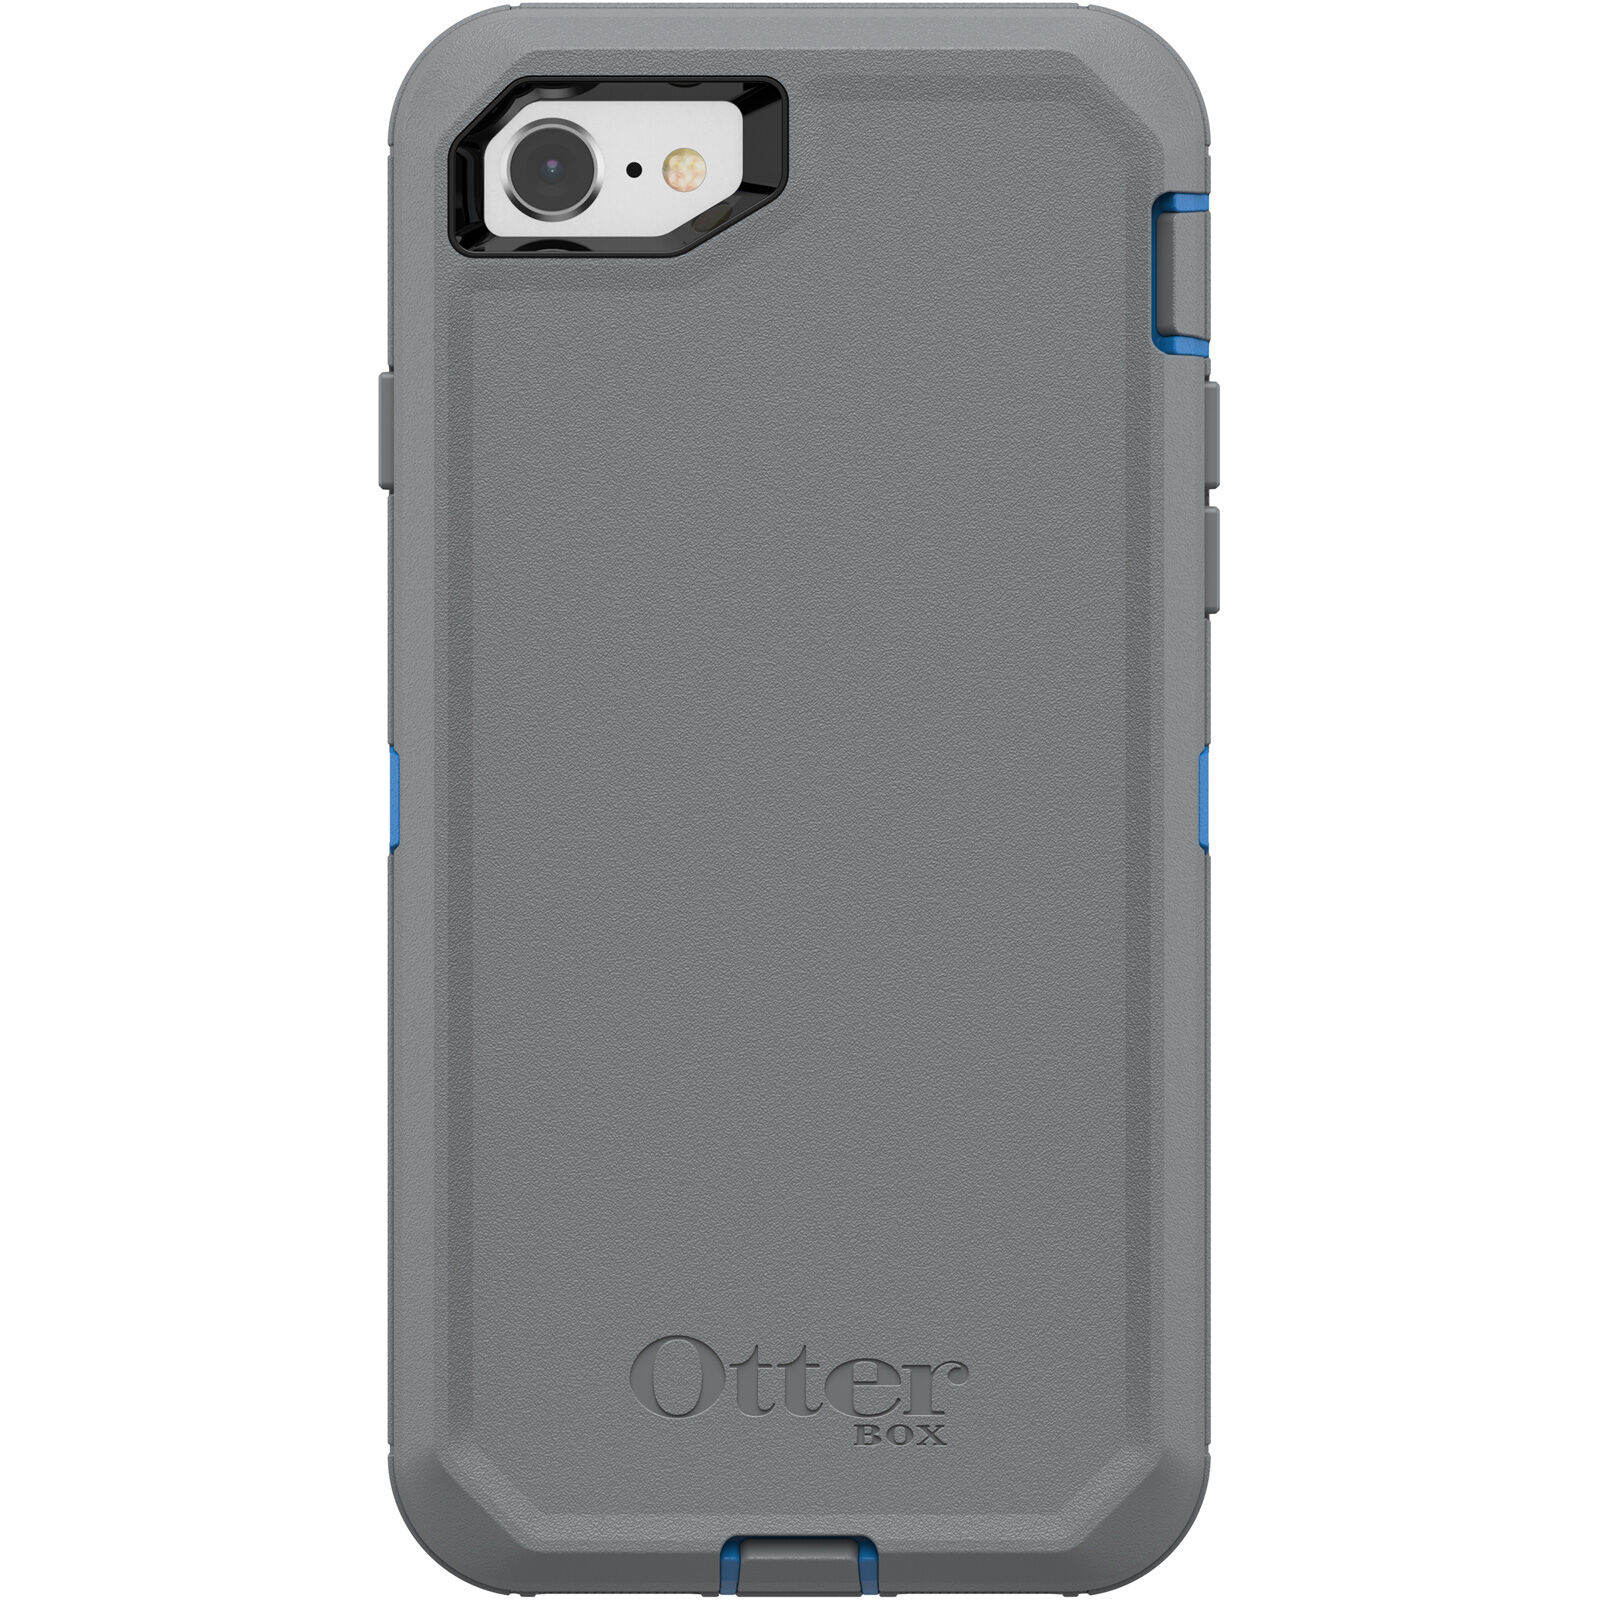 iPhone 8 and iPhone 7 Defender Series Cases from OtterBox